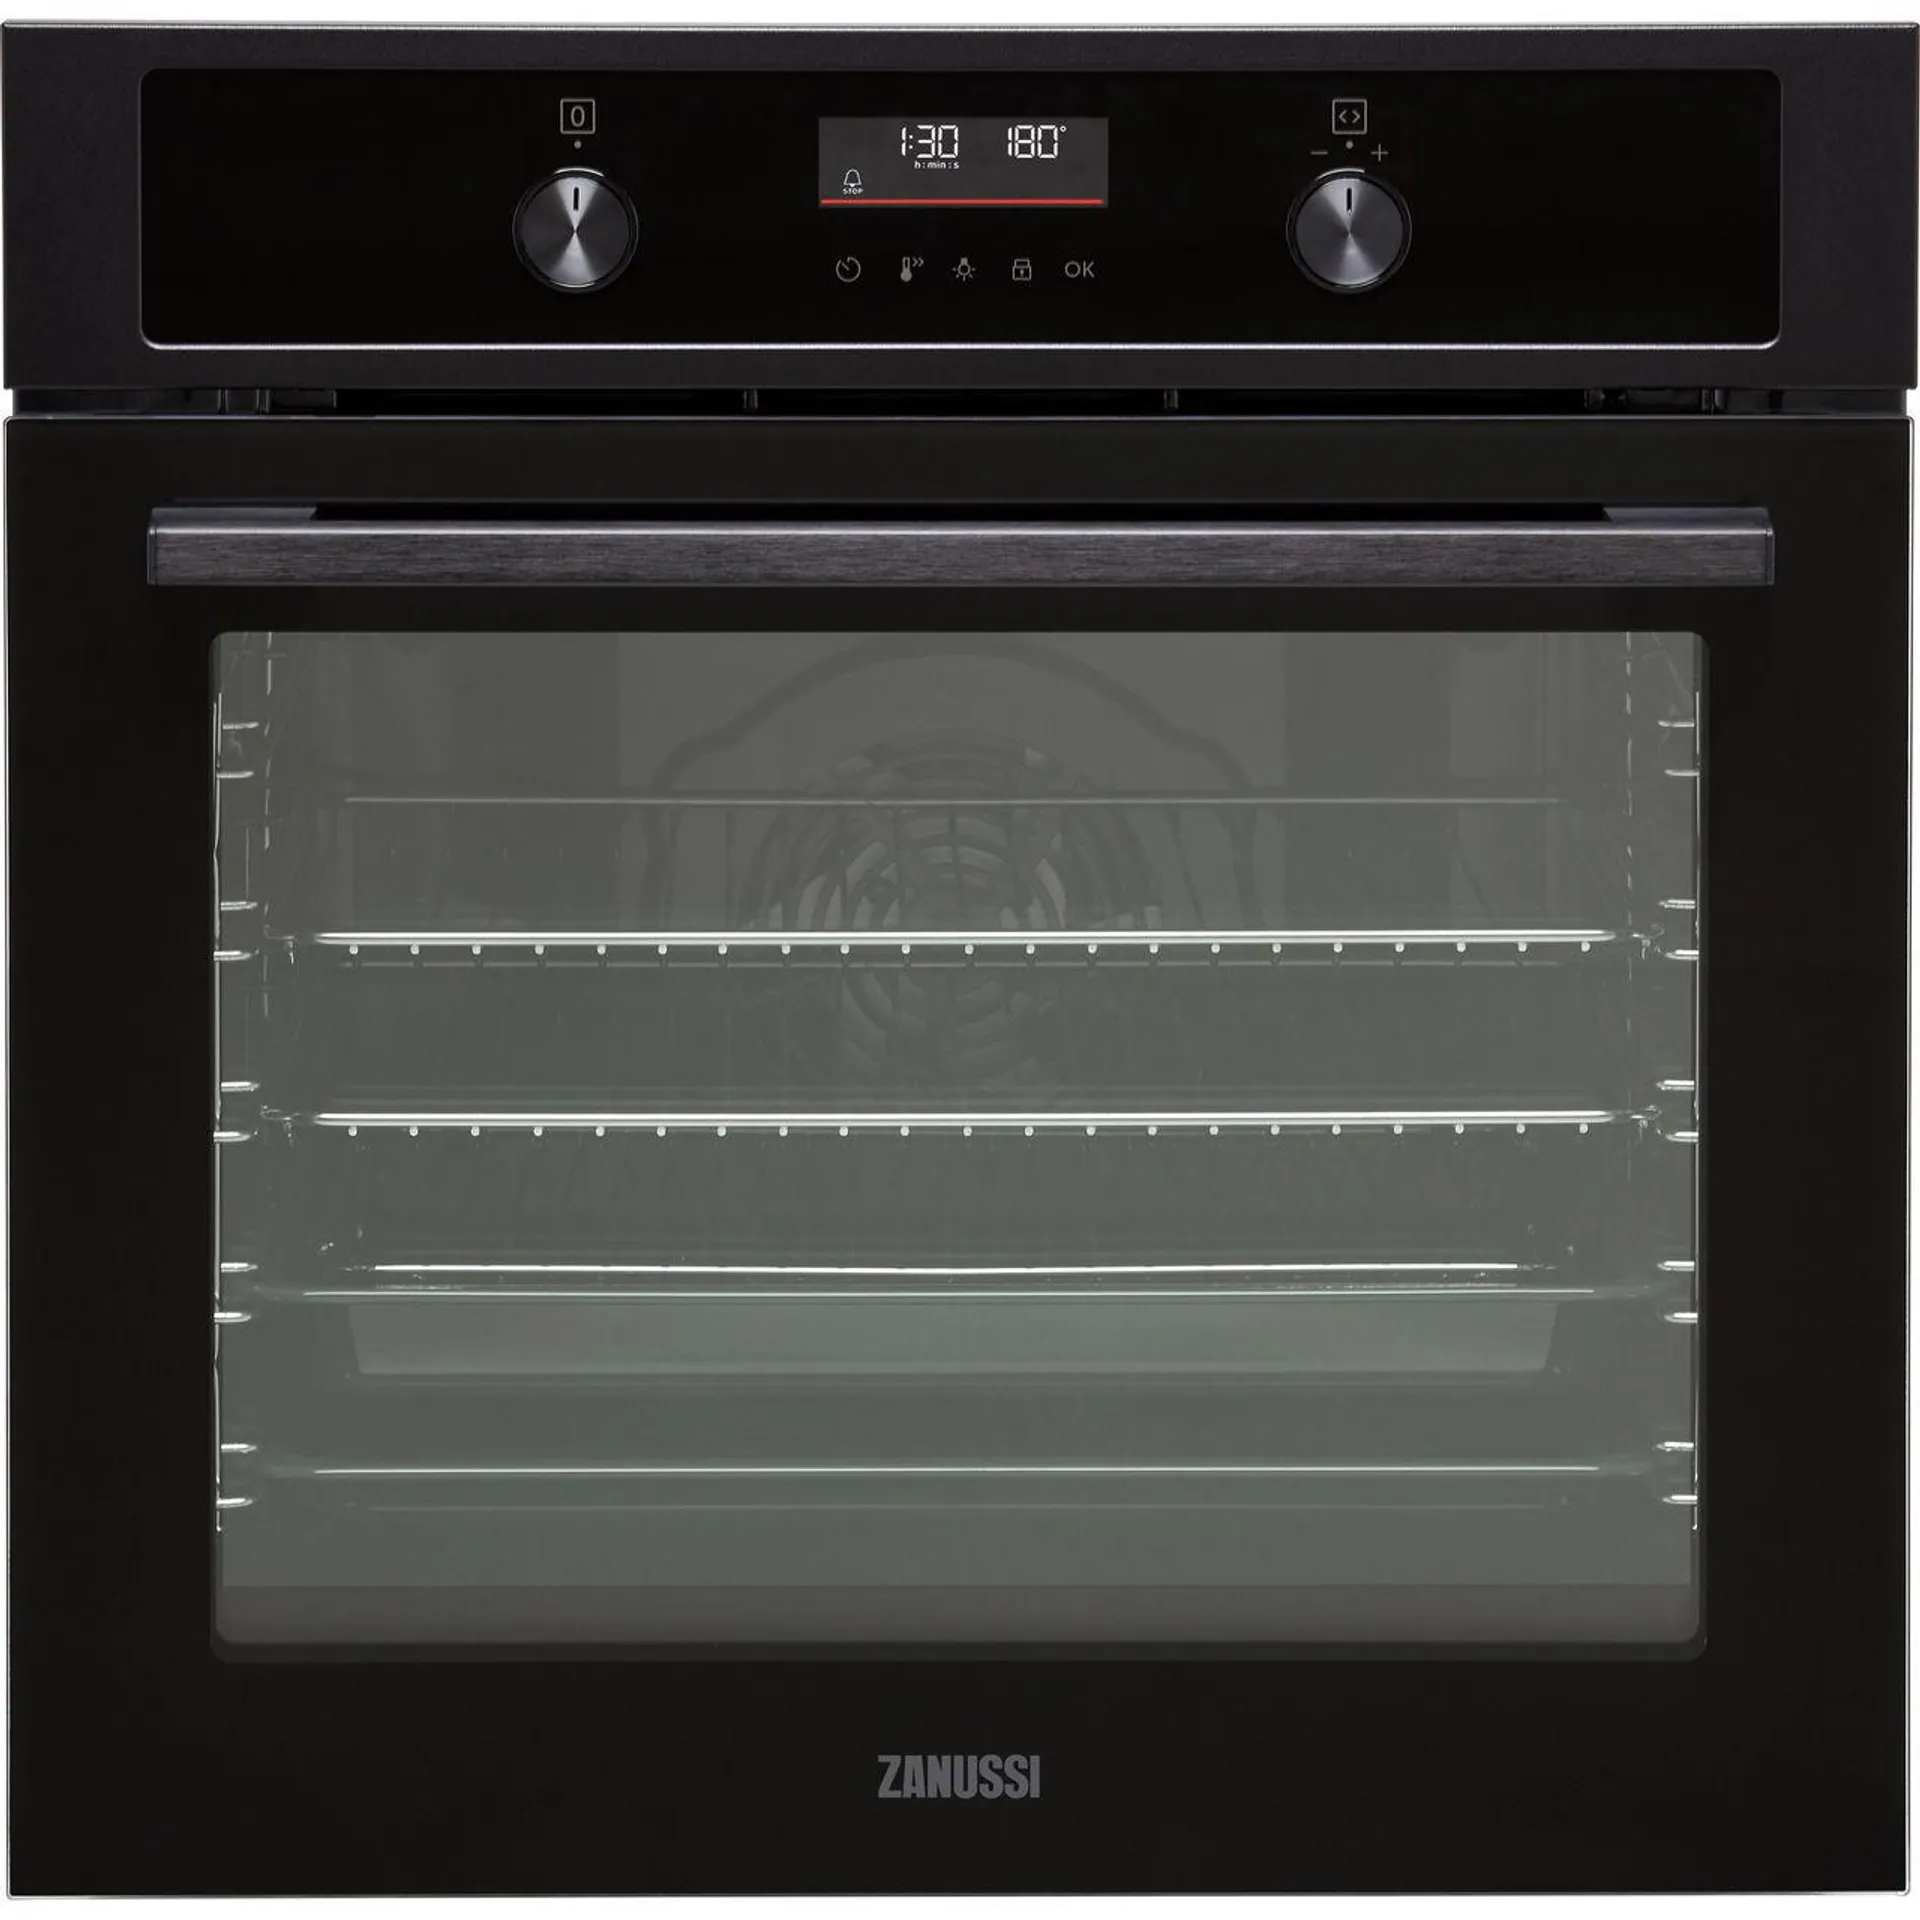 Zanussi ZOHNA7KN Built In Electric Single Oven - Black - A+ Rated